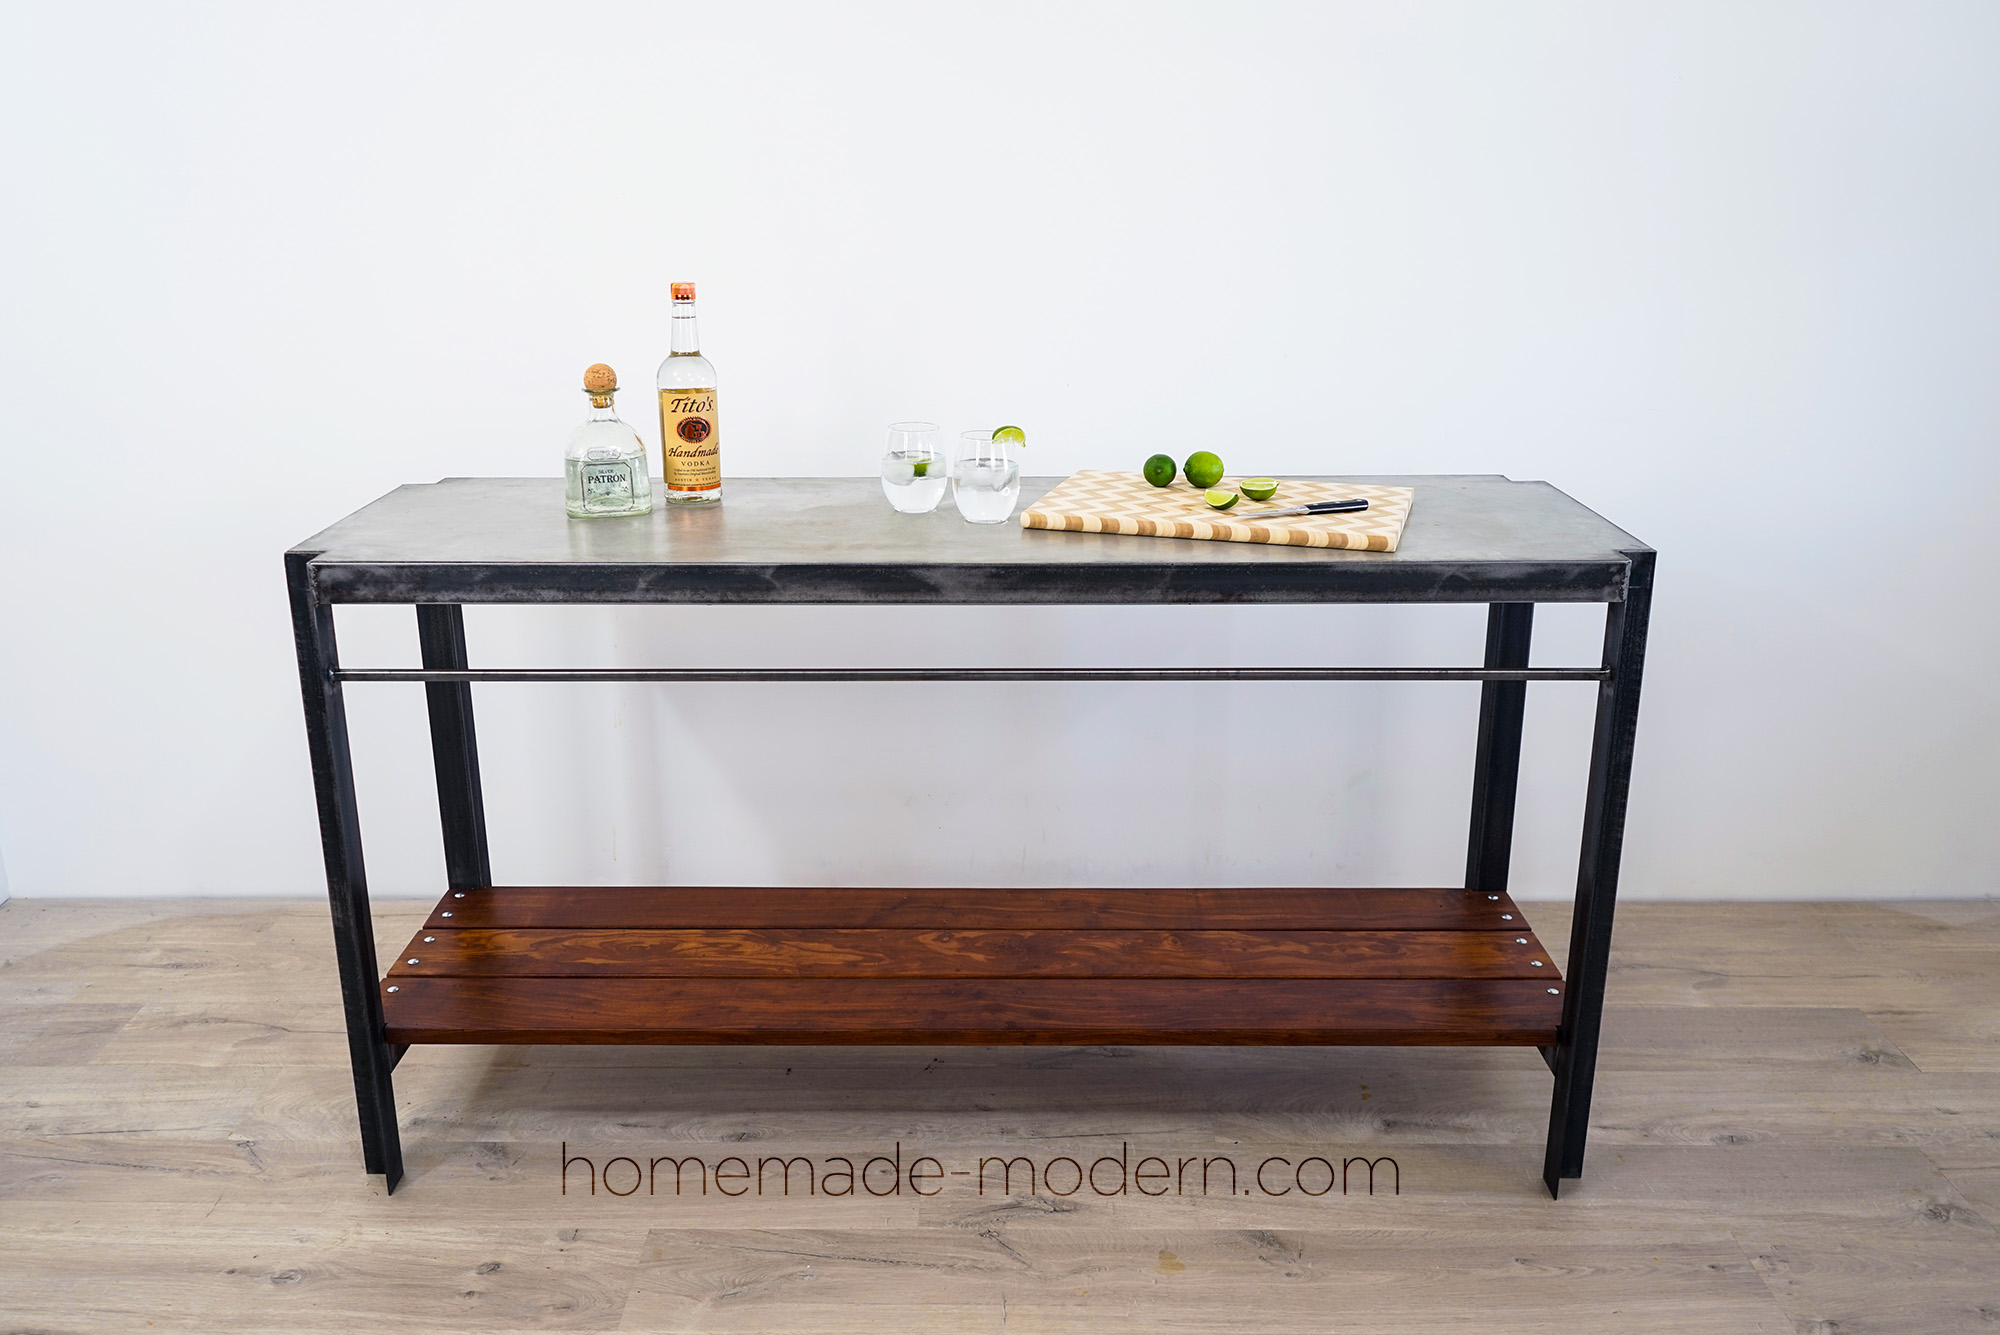 This DIY Outdoor Bar features a poured in place concrete countertop and wood shelves made out of Cumaru. For more information go to HomeMade-Modern.com